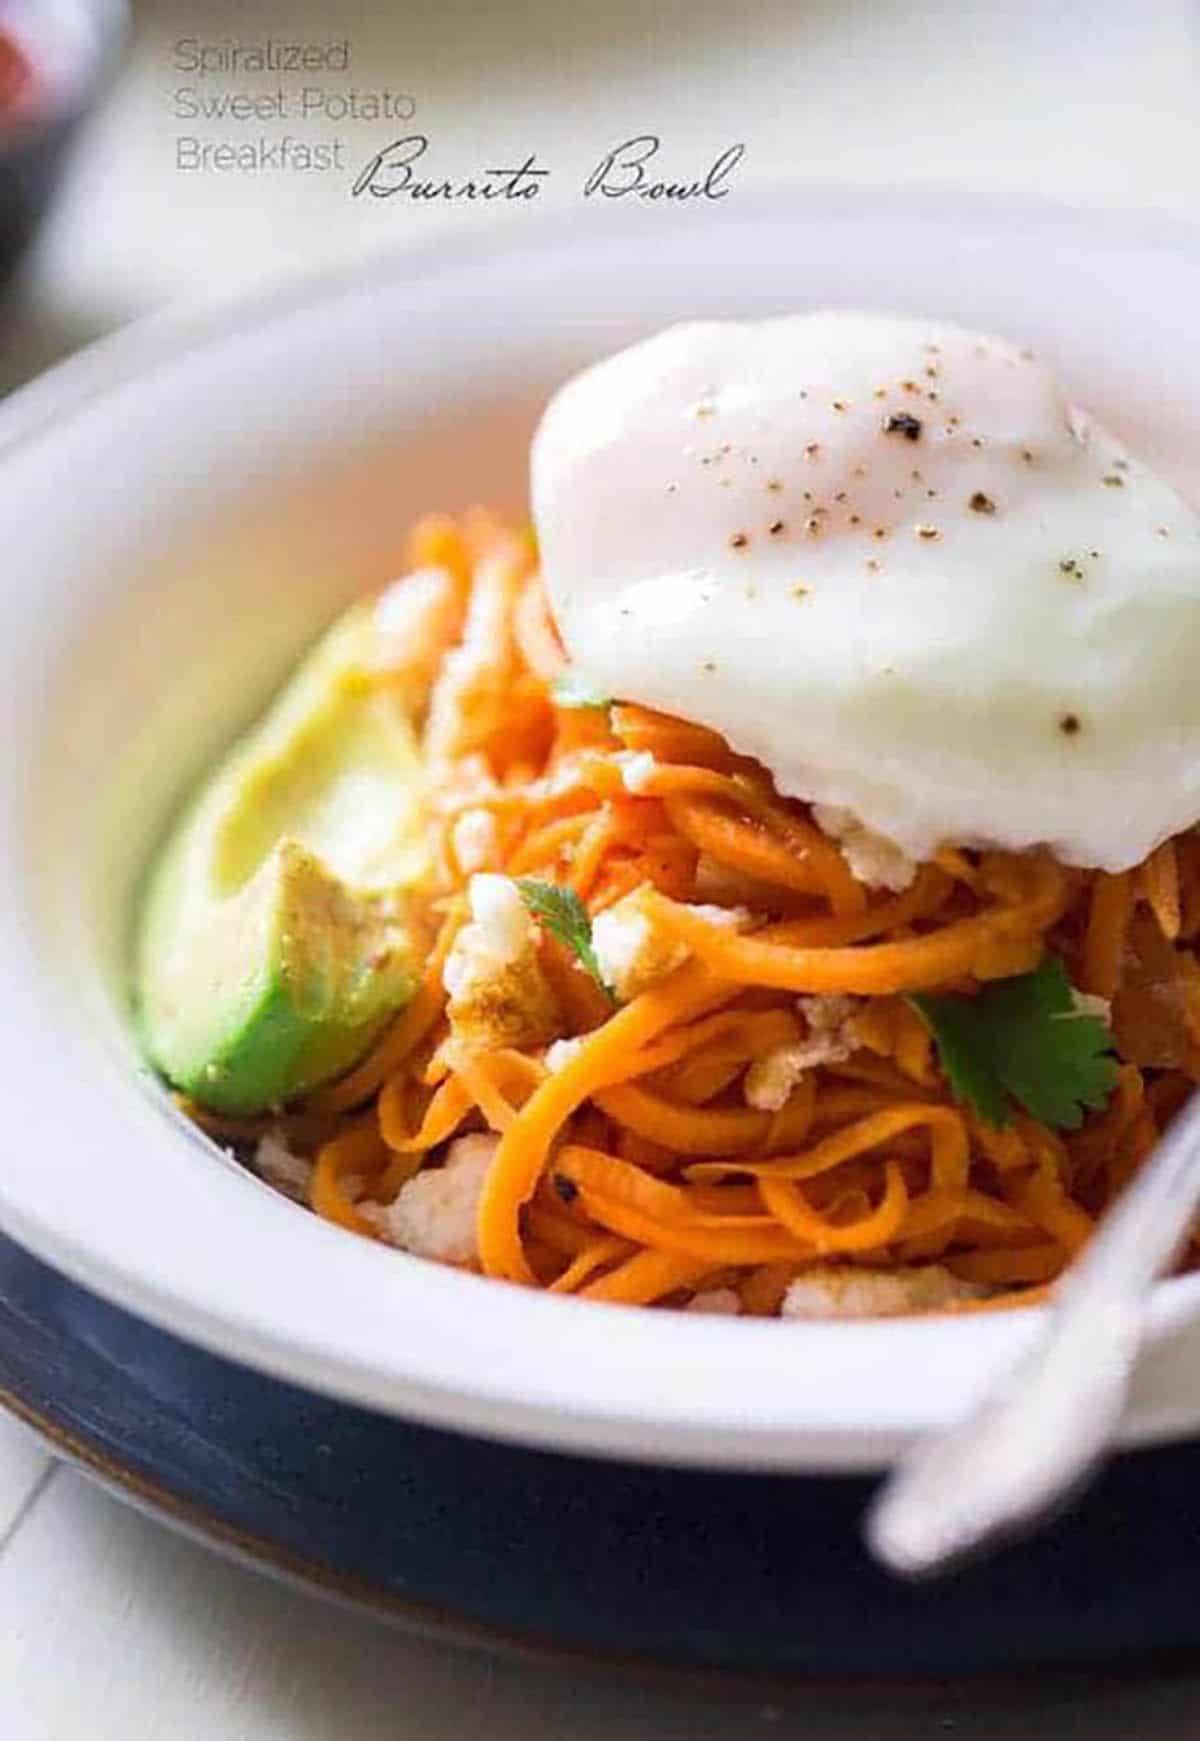 Breakfast Burrito Bowl with Sweet Potato Noodles topped with poached egg and sliced avocado